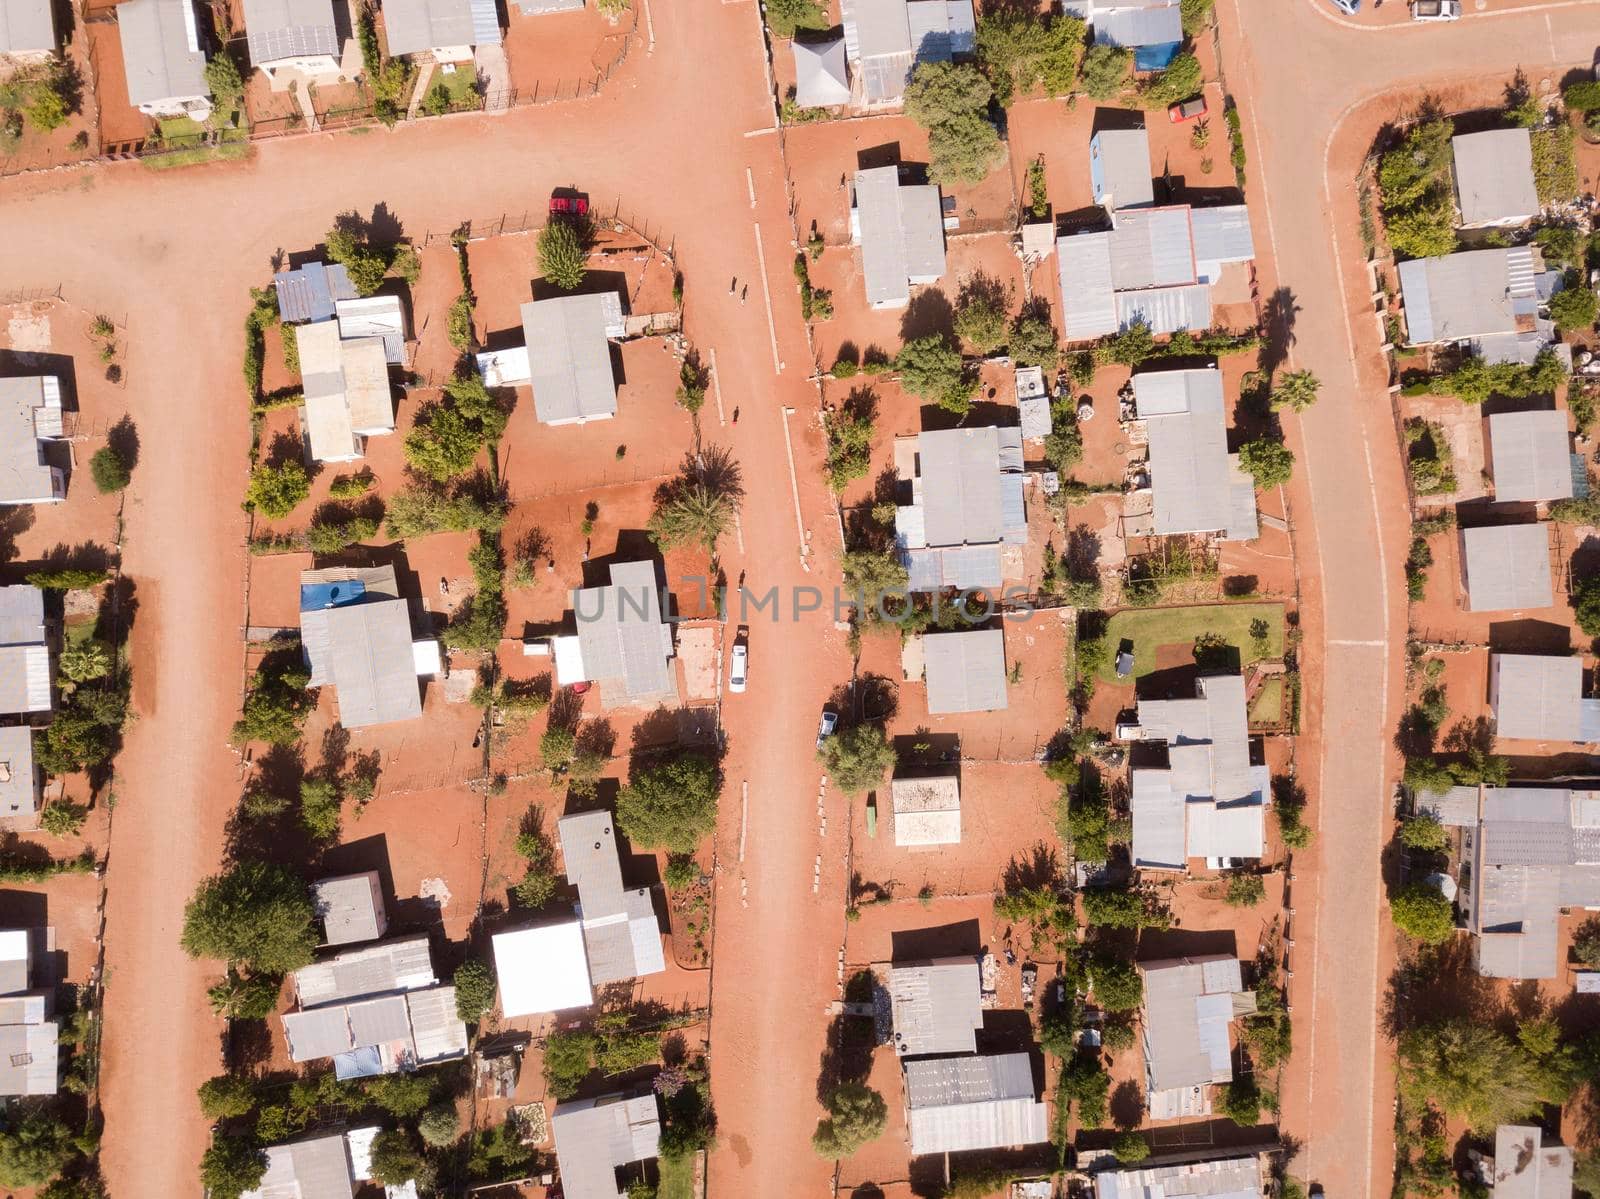 Aerial view above houses and dirt road streets in African village by fivepointsix